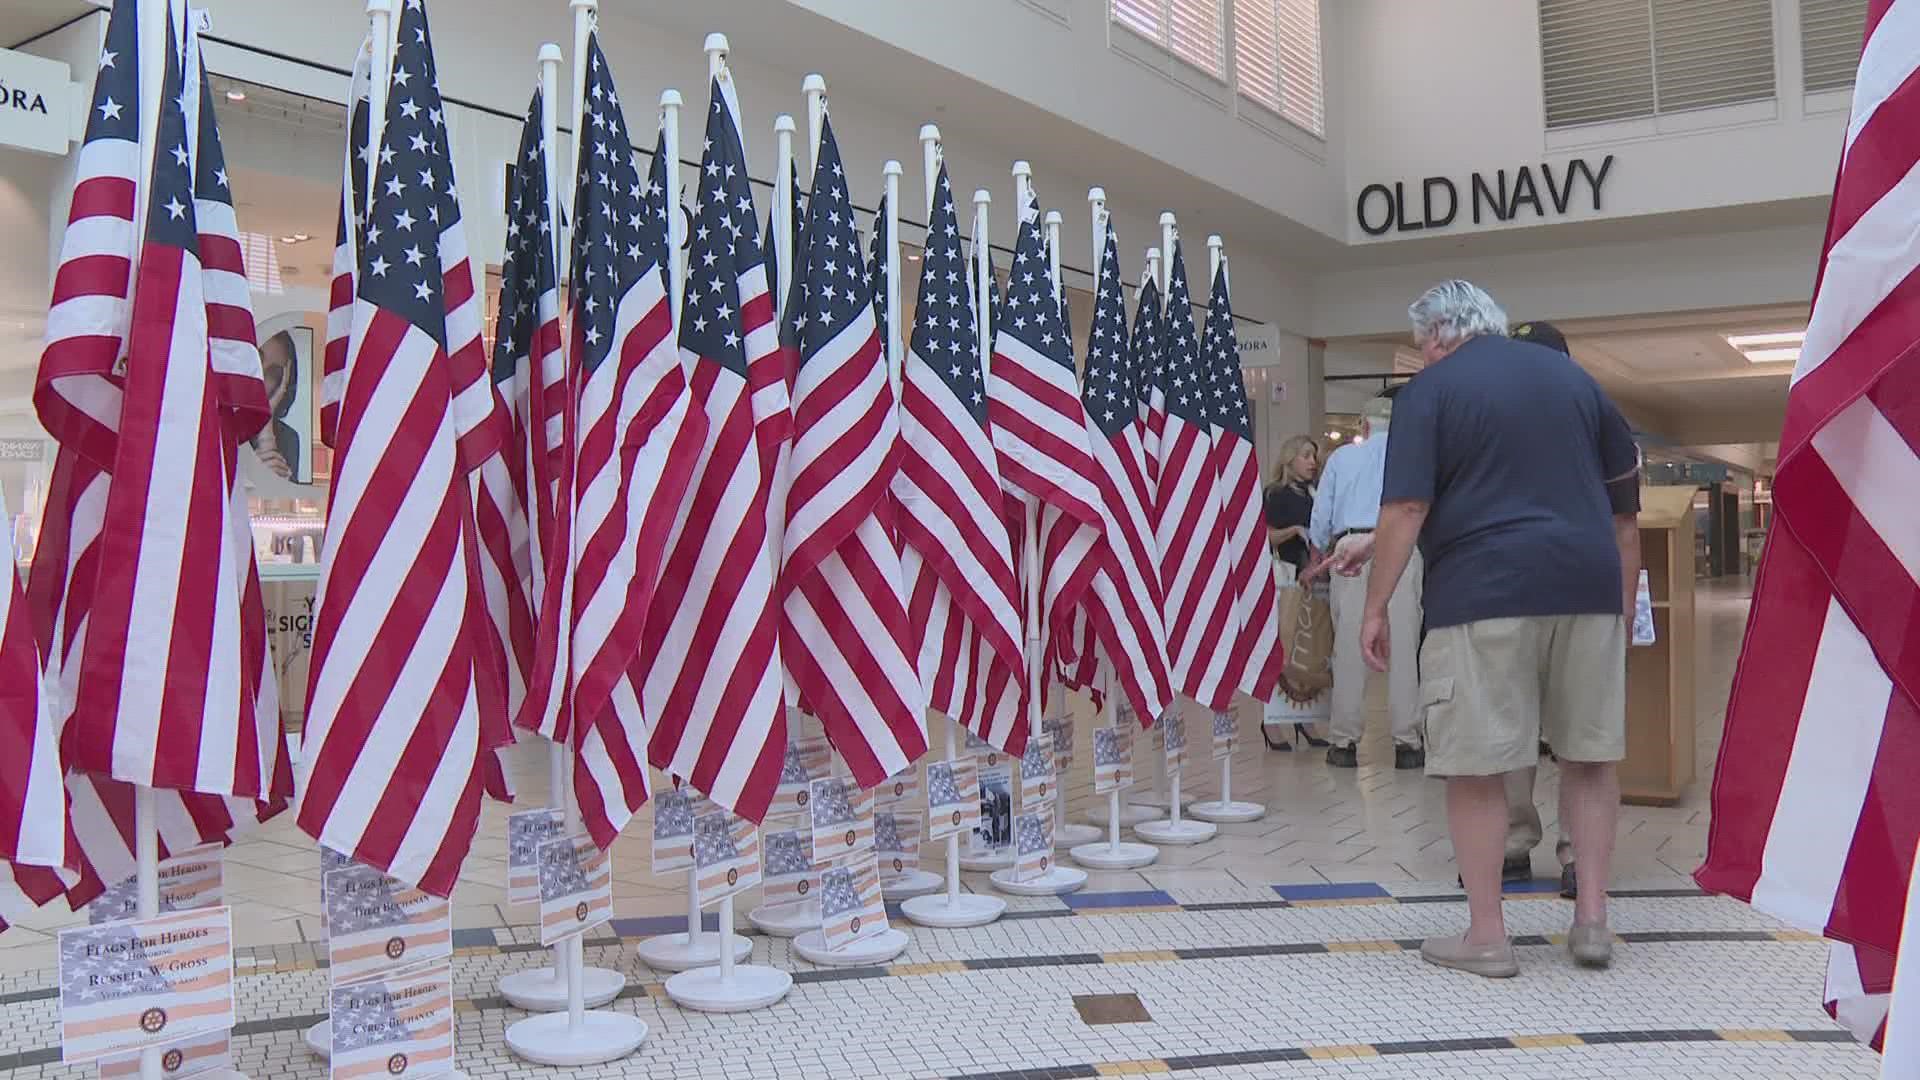 The Portland Rotary Club in partnership with the Maine Mall is hosting its fourth Flags for Heroes community event.